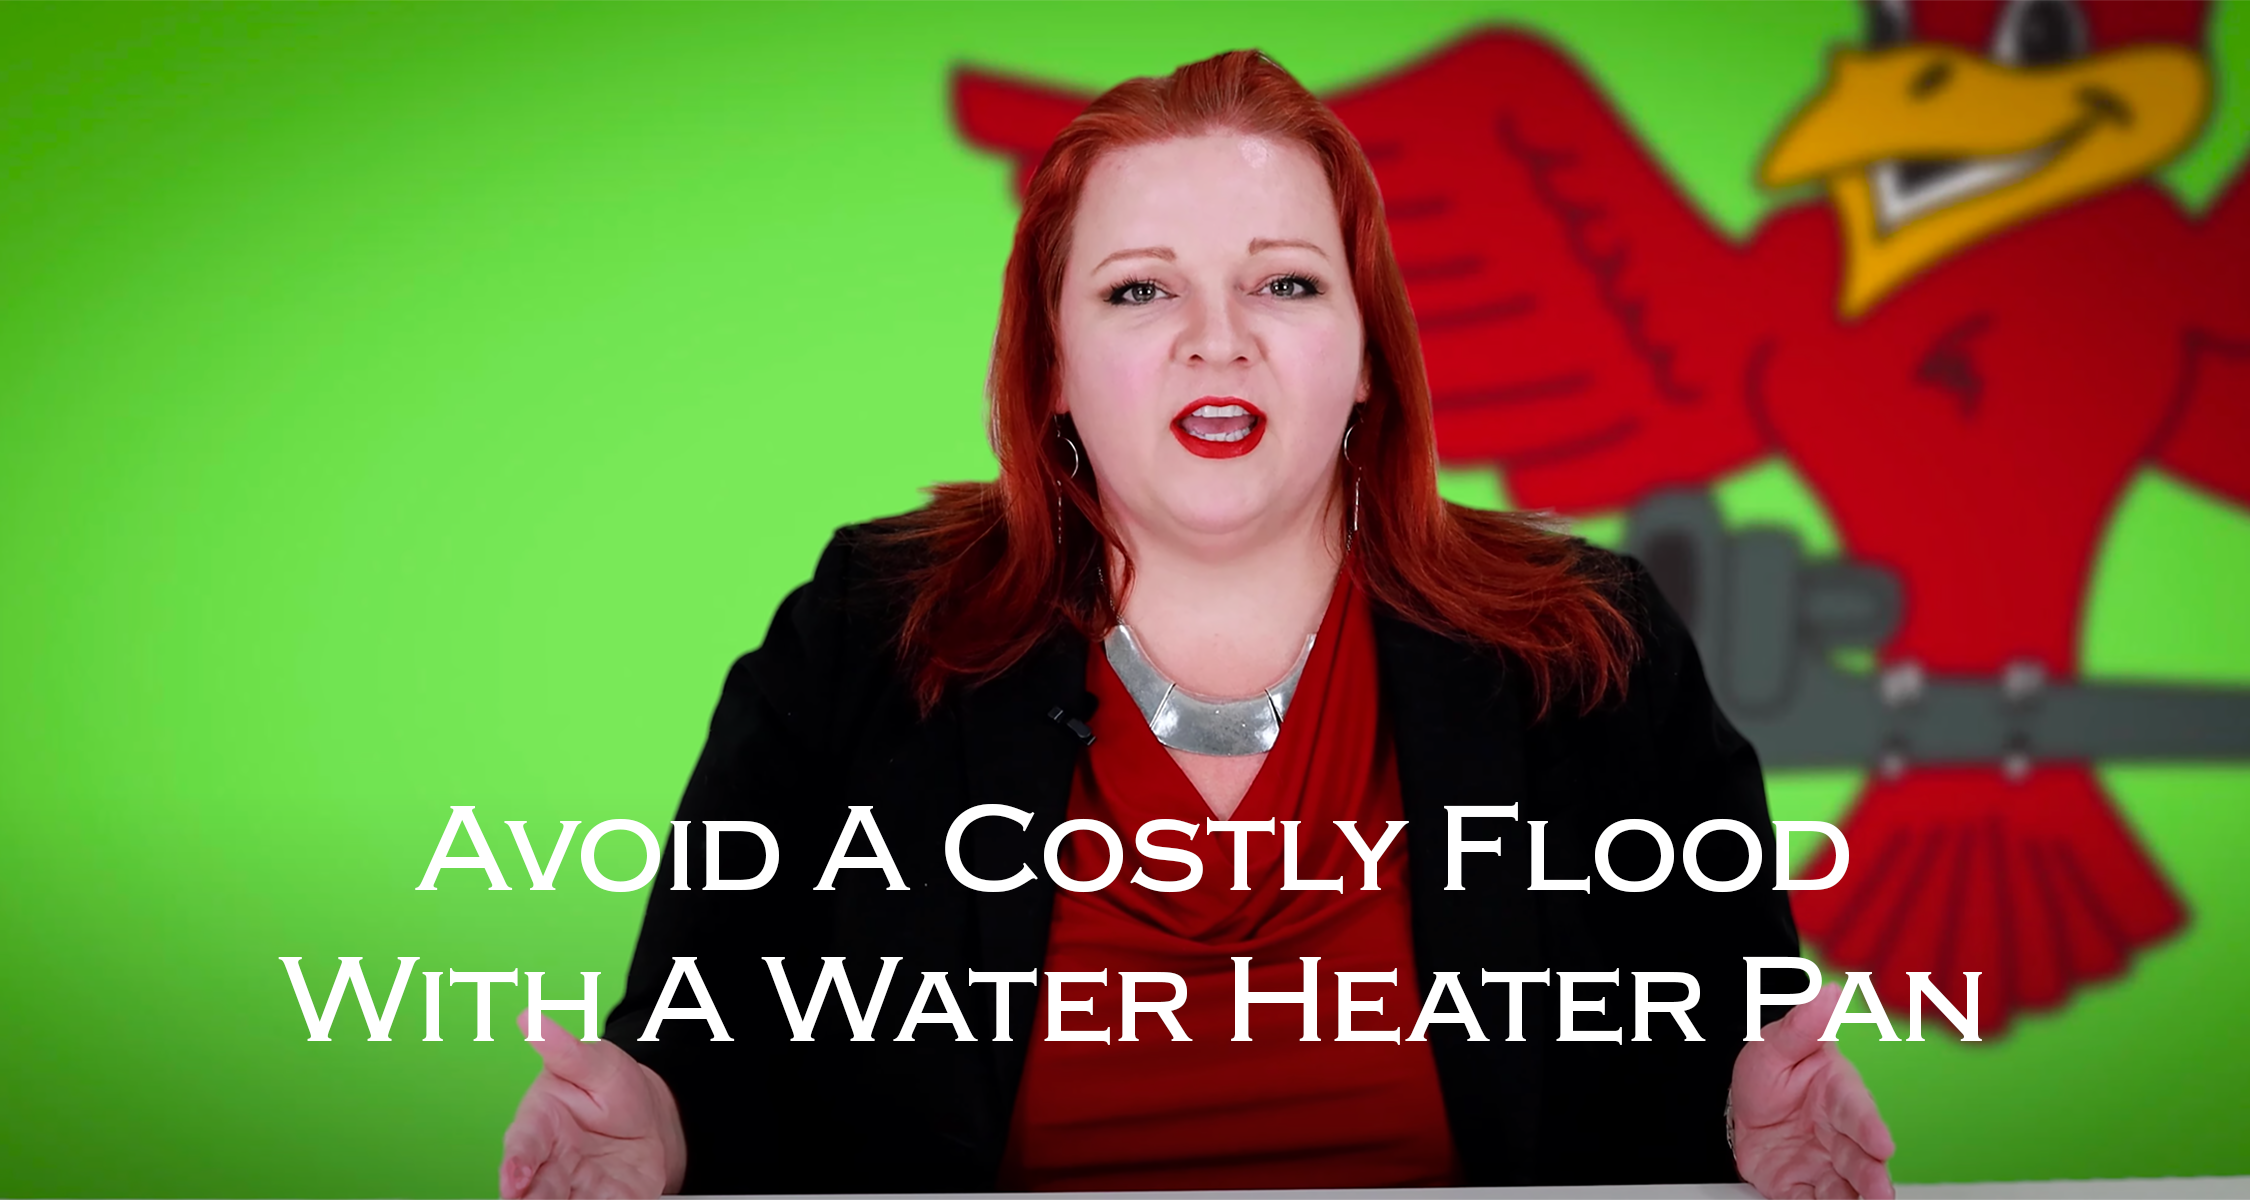 Image for Robin's Plumbing blog "Avoid-a-costly-flood-with-a-water-heater-pan"